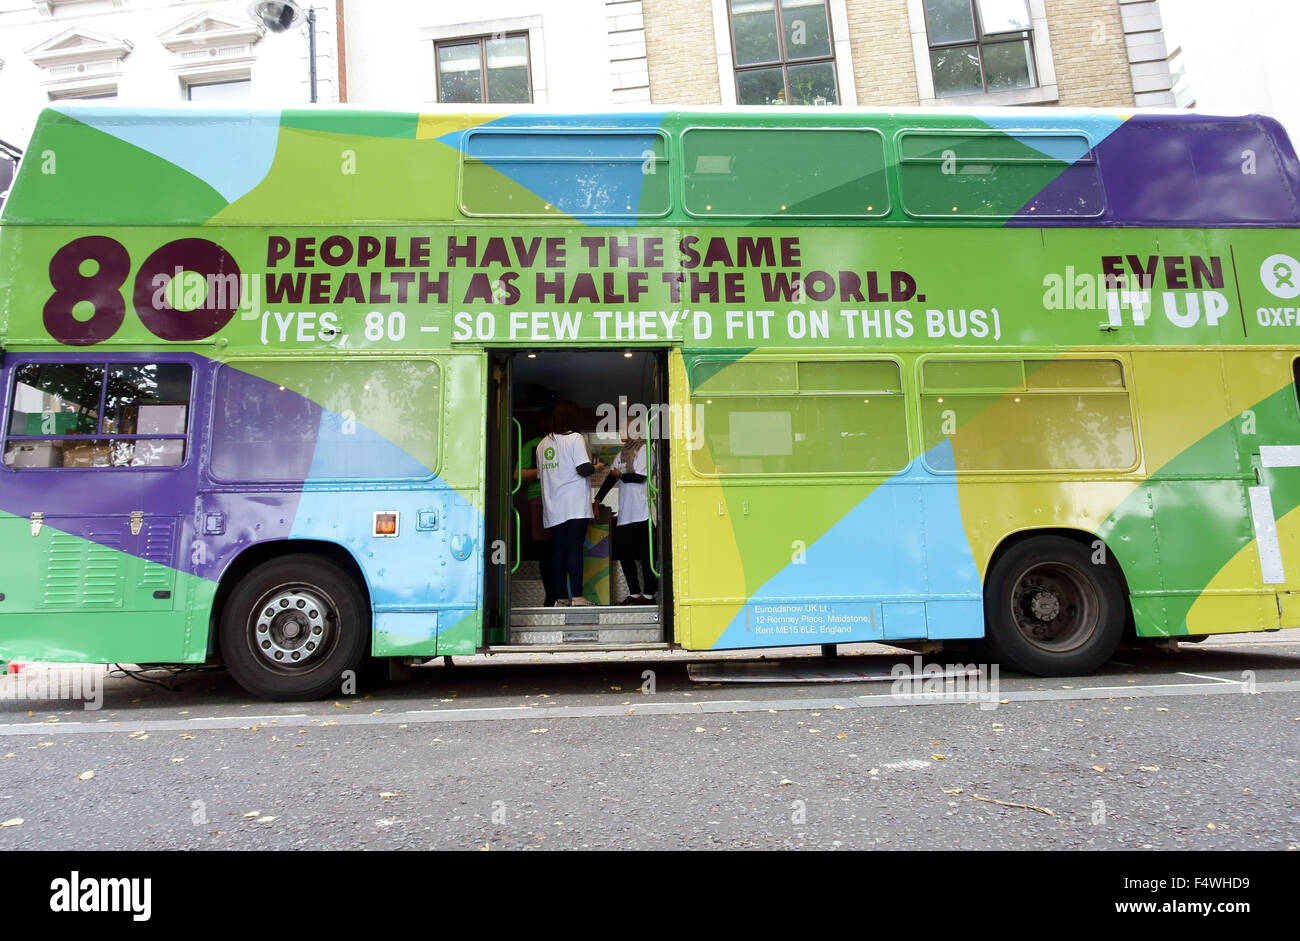 Oxfam 'Evenglbal It Up' bus campaigns against global inequality of wealth, London Stock Photo